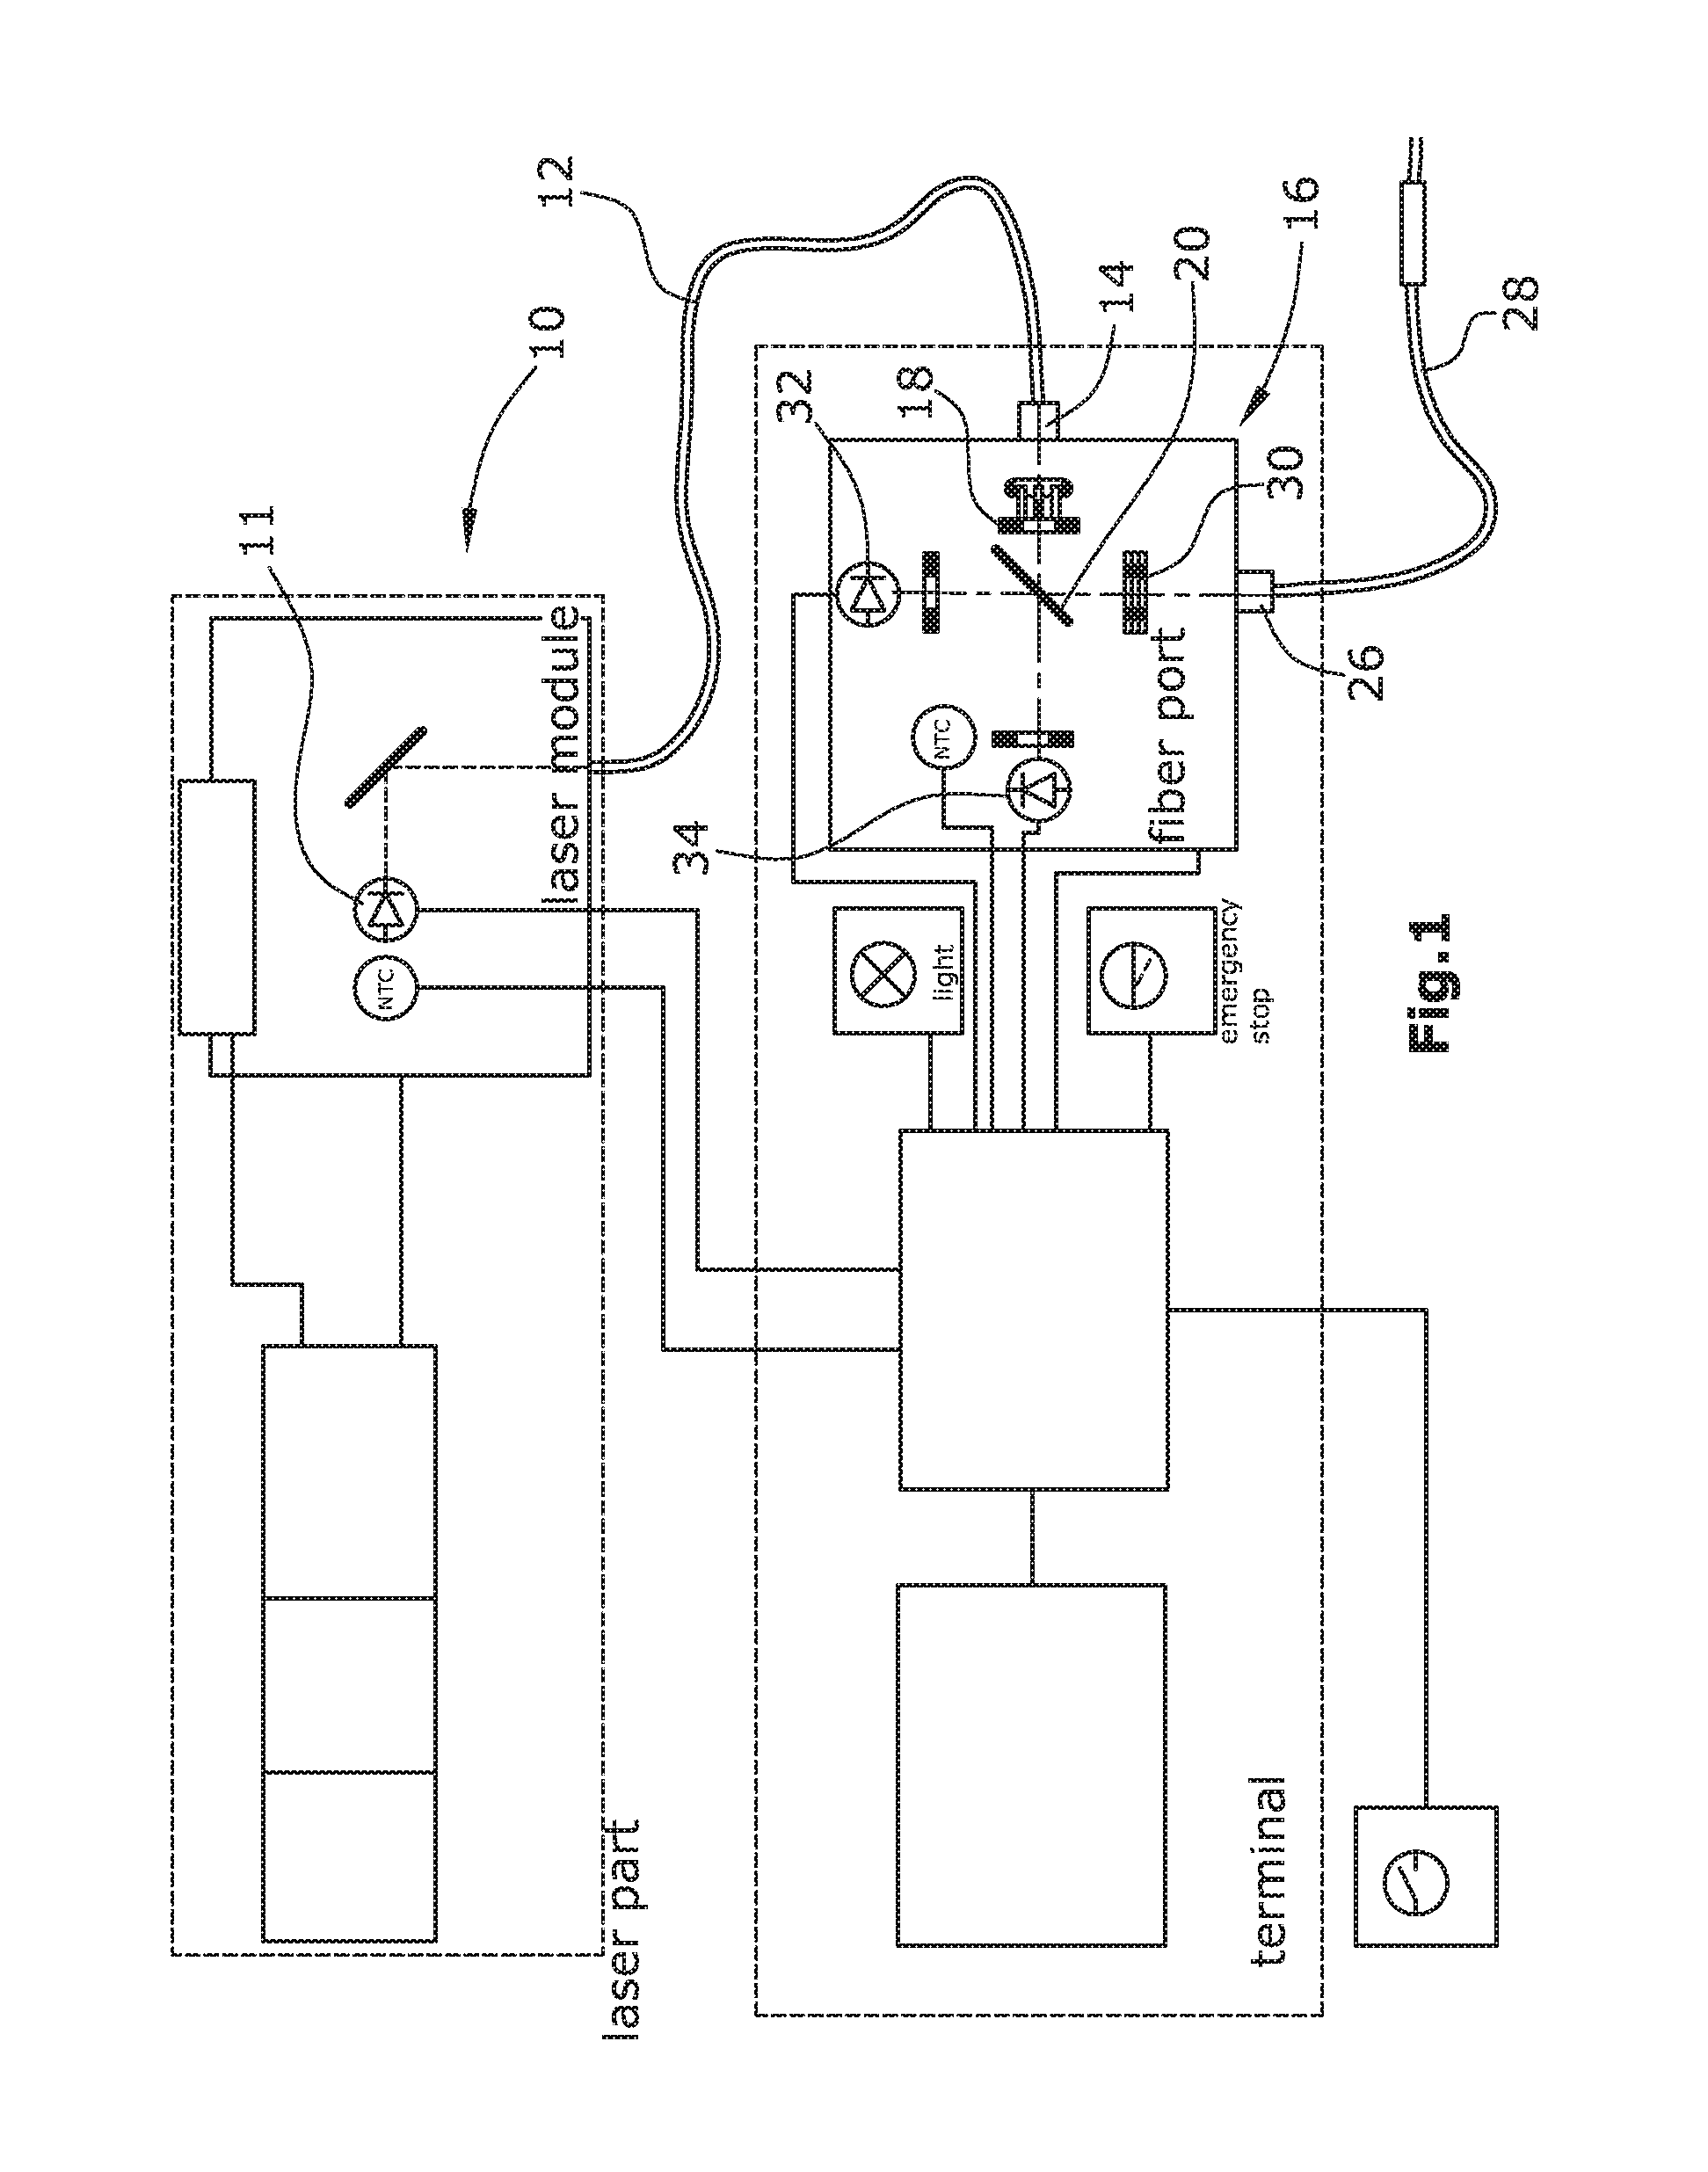 Coupling Device for Connecting an Optical Waveguide to an Associated Optical Waveguide Connection